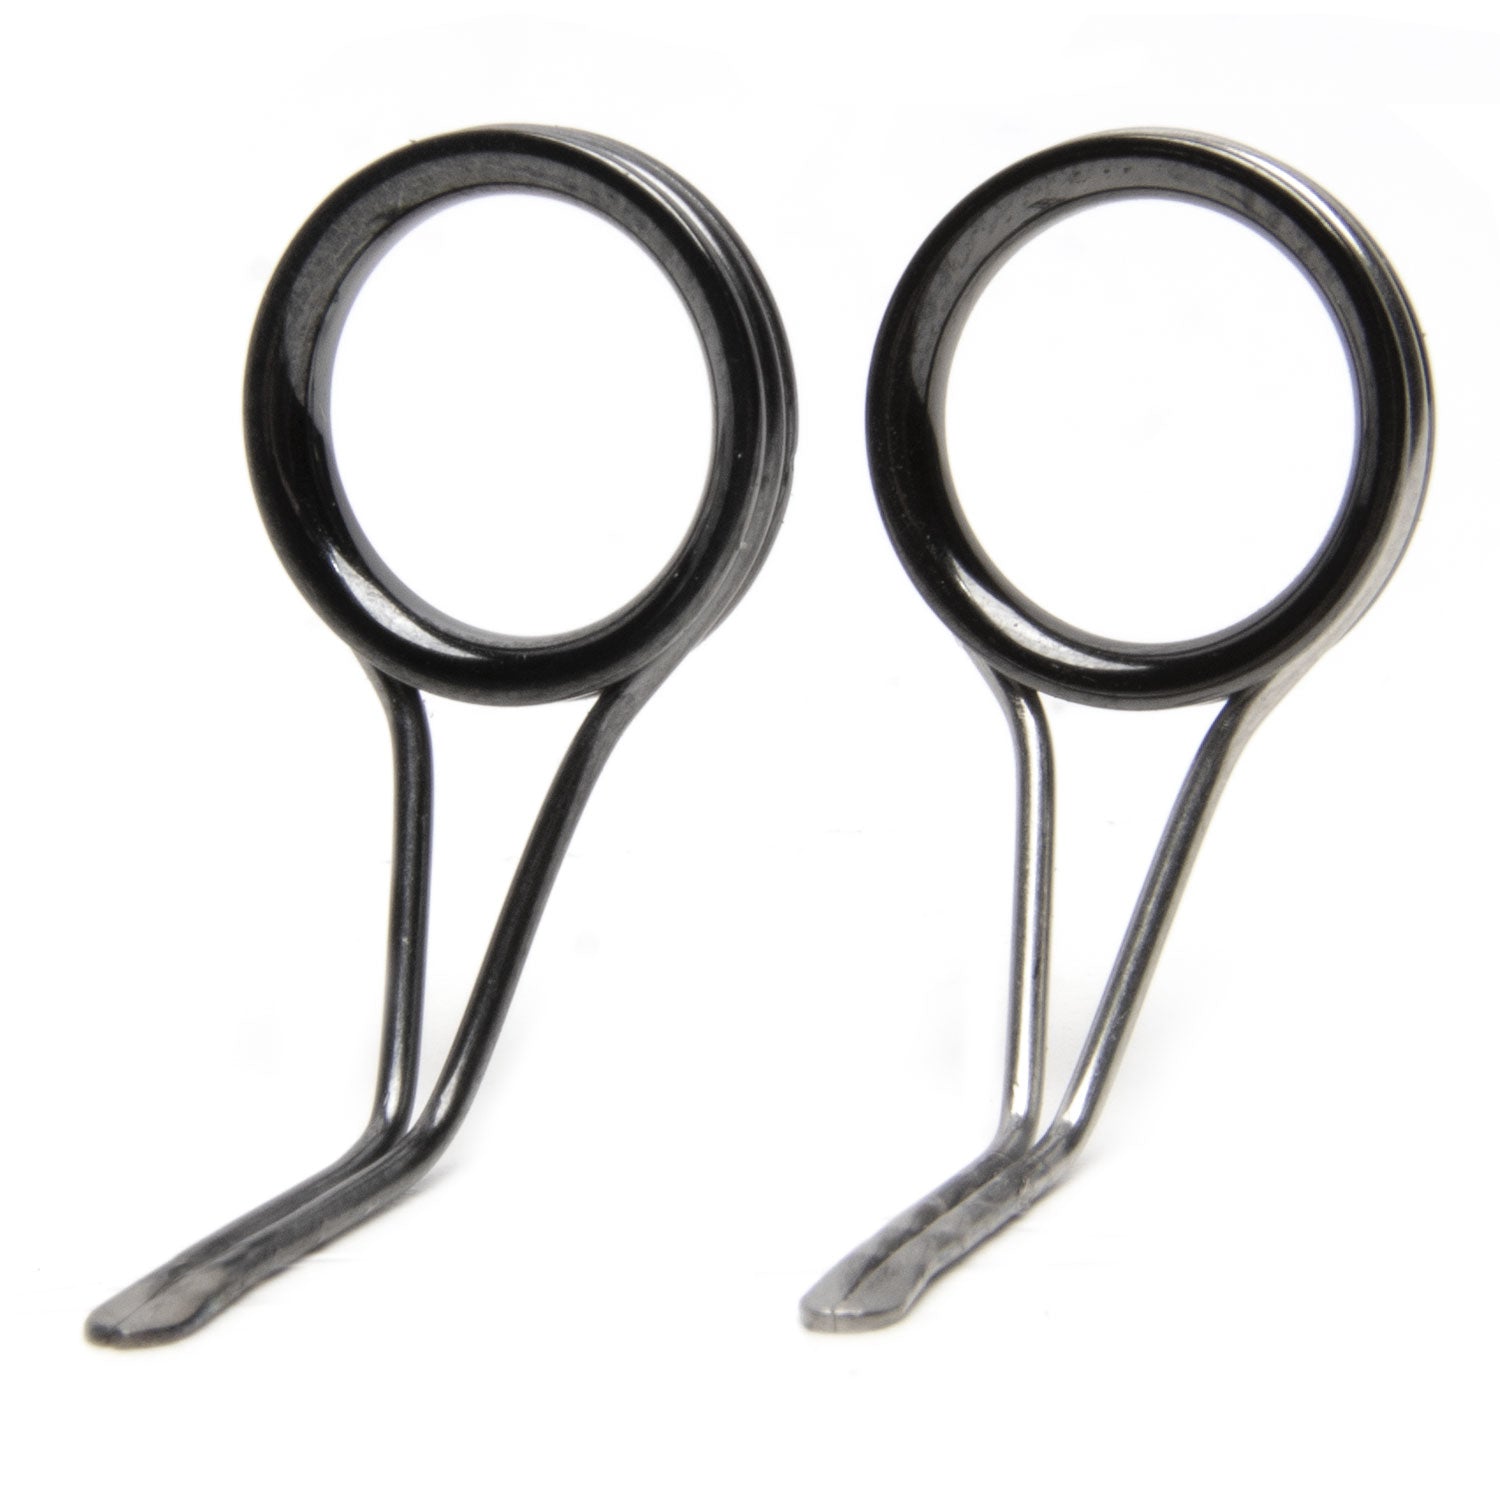 REC CERecoil Single Foot Spinning Guides